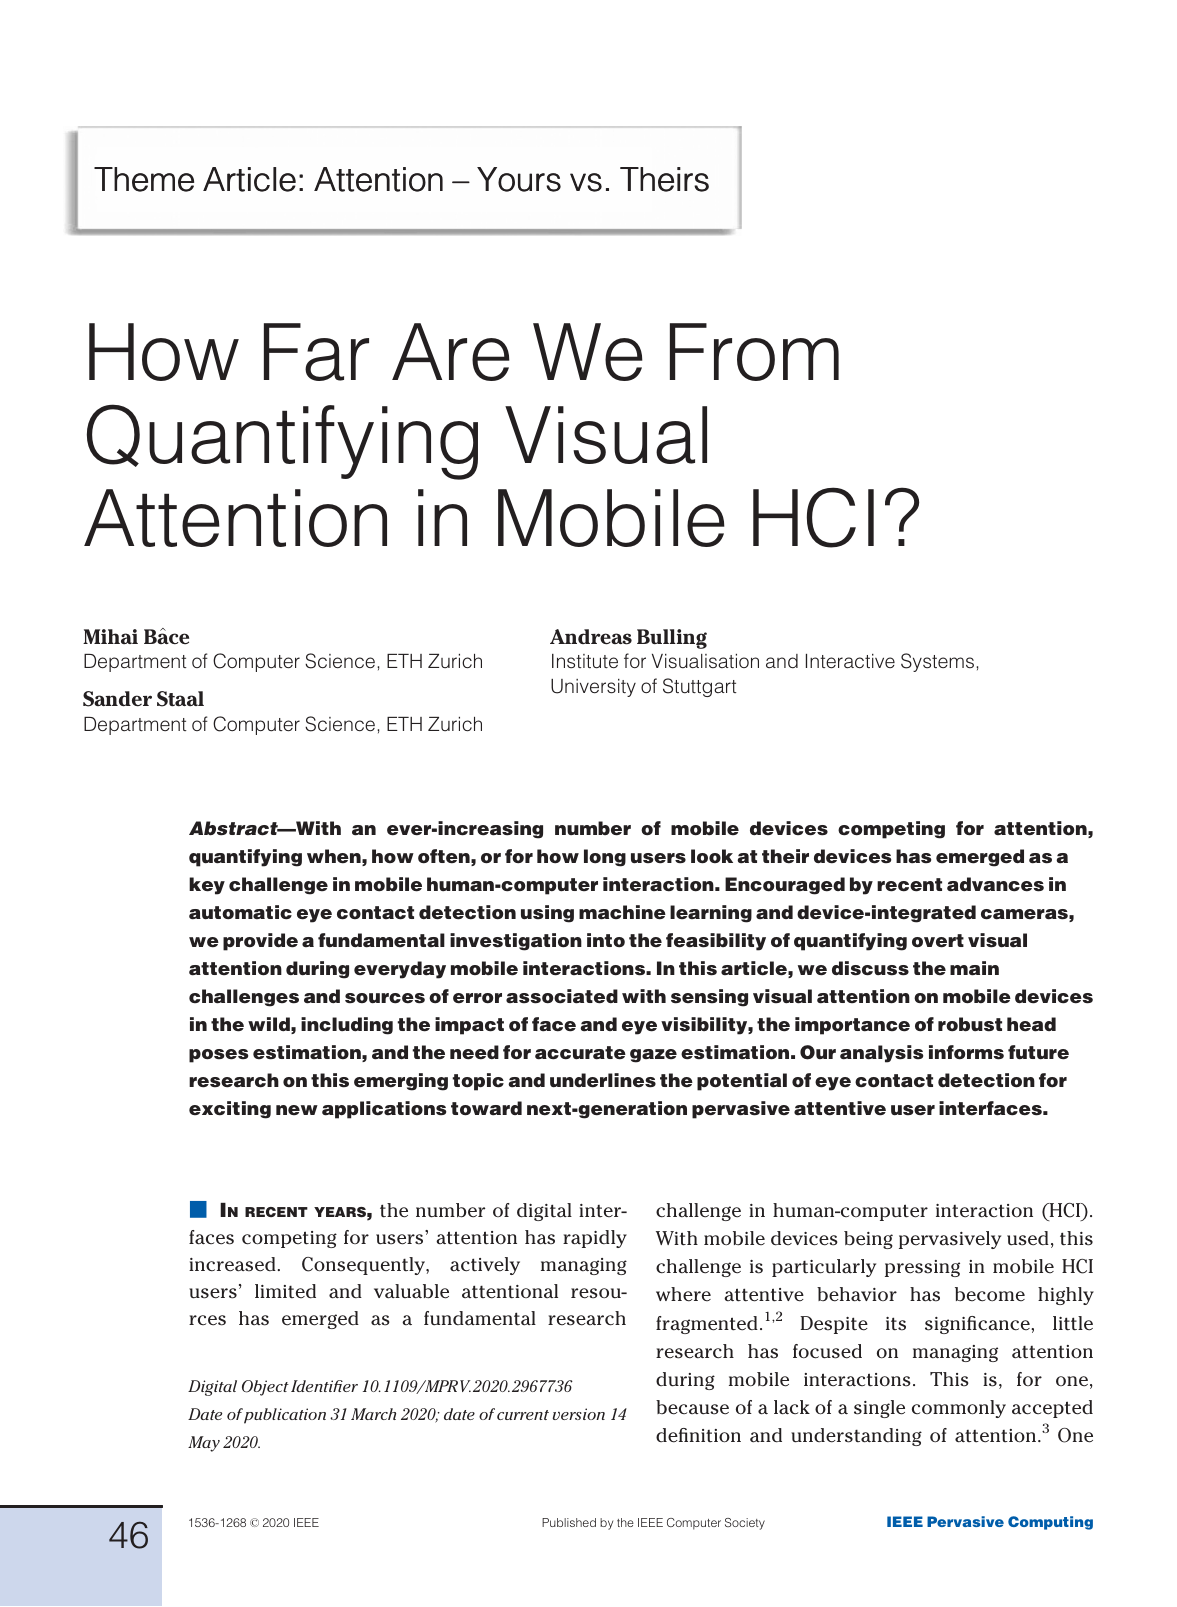 How far are we from quantifying visual attention in mobile HCI?